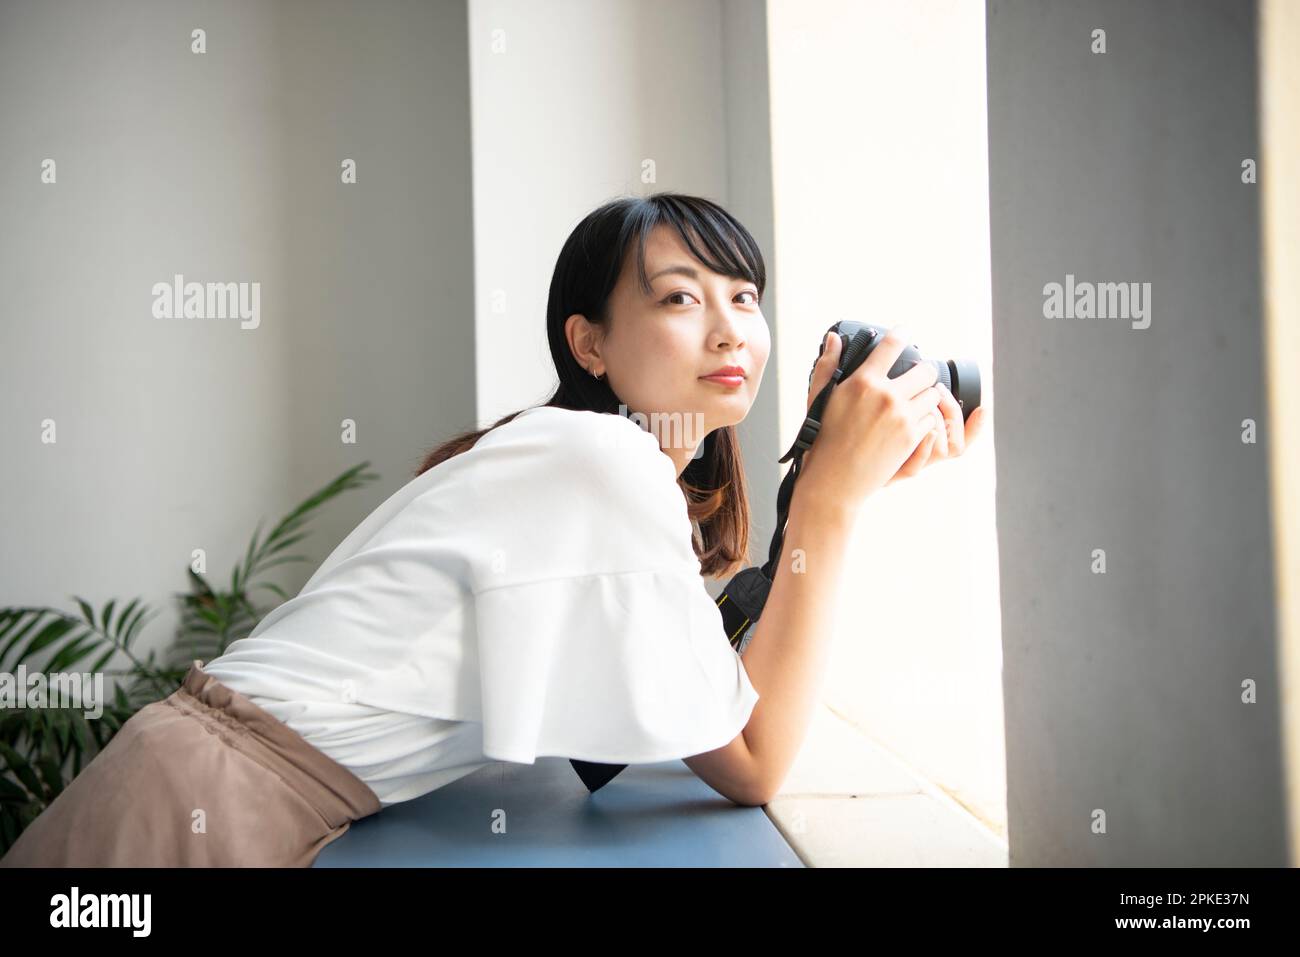 Woman holding SLR camera and looking at me Stock Photo